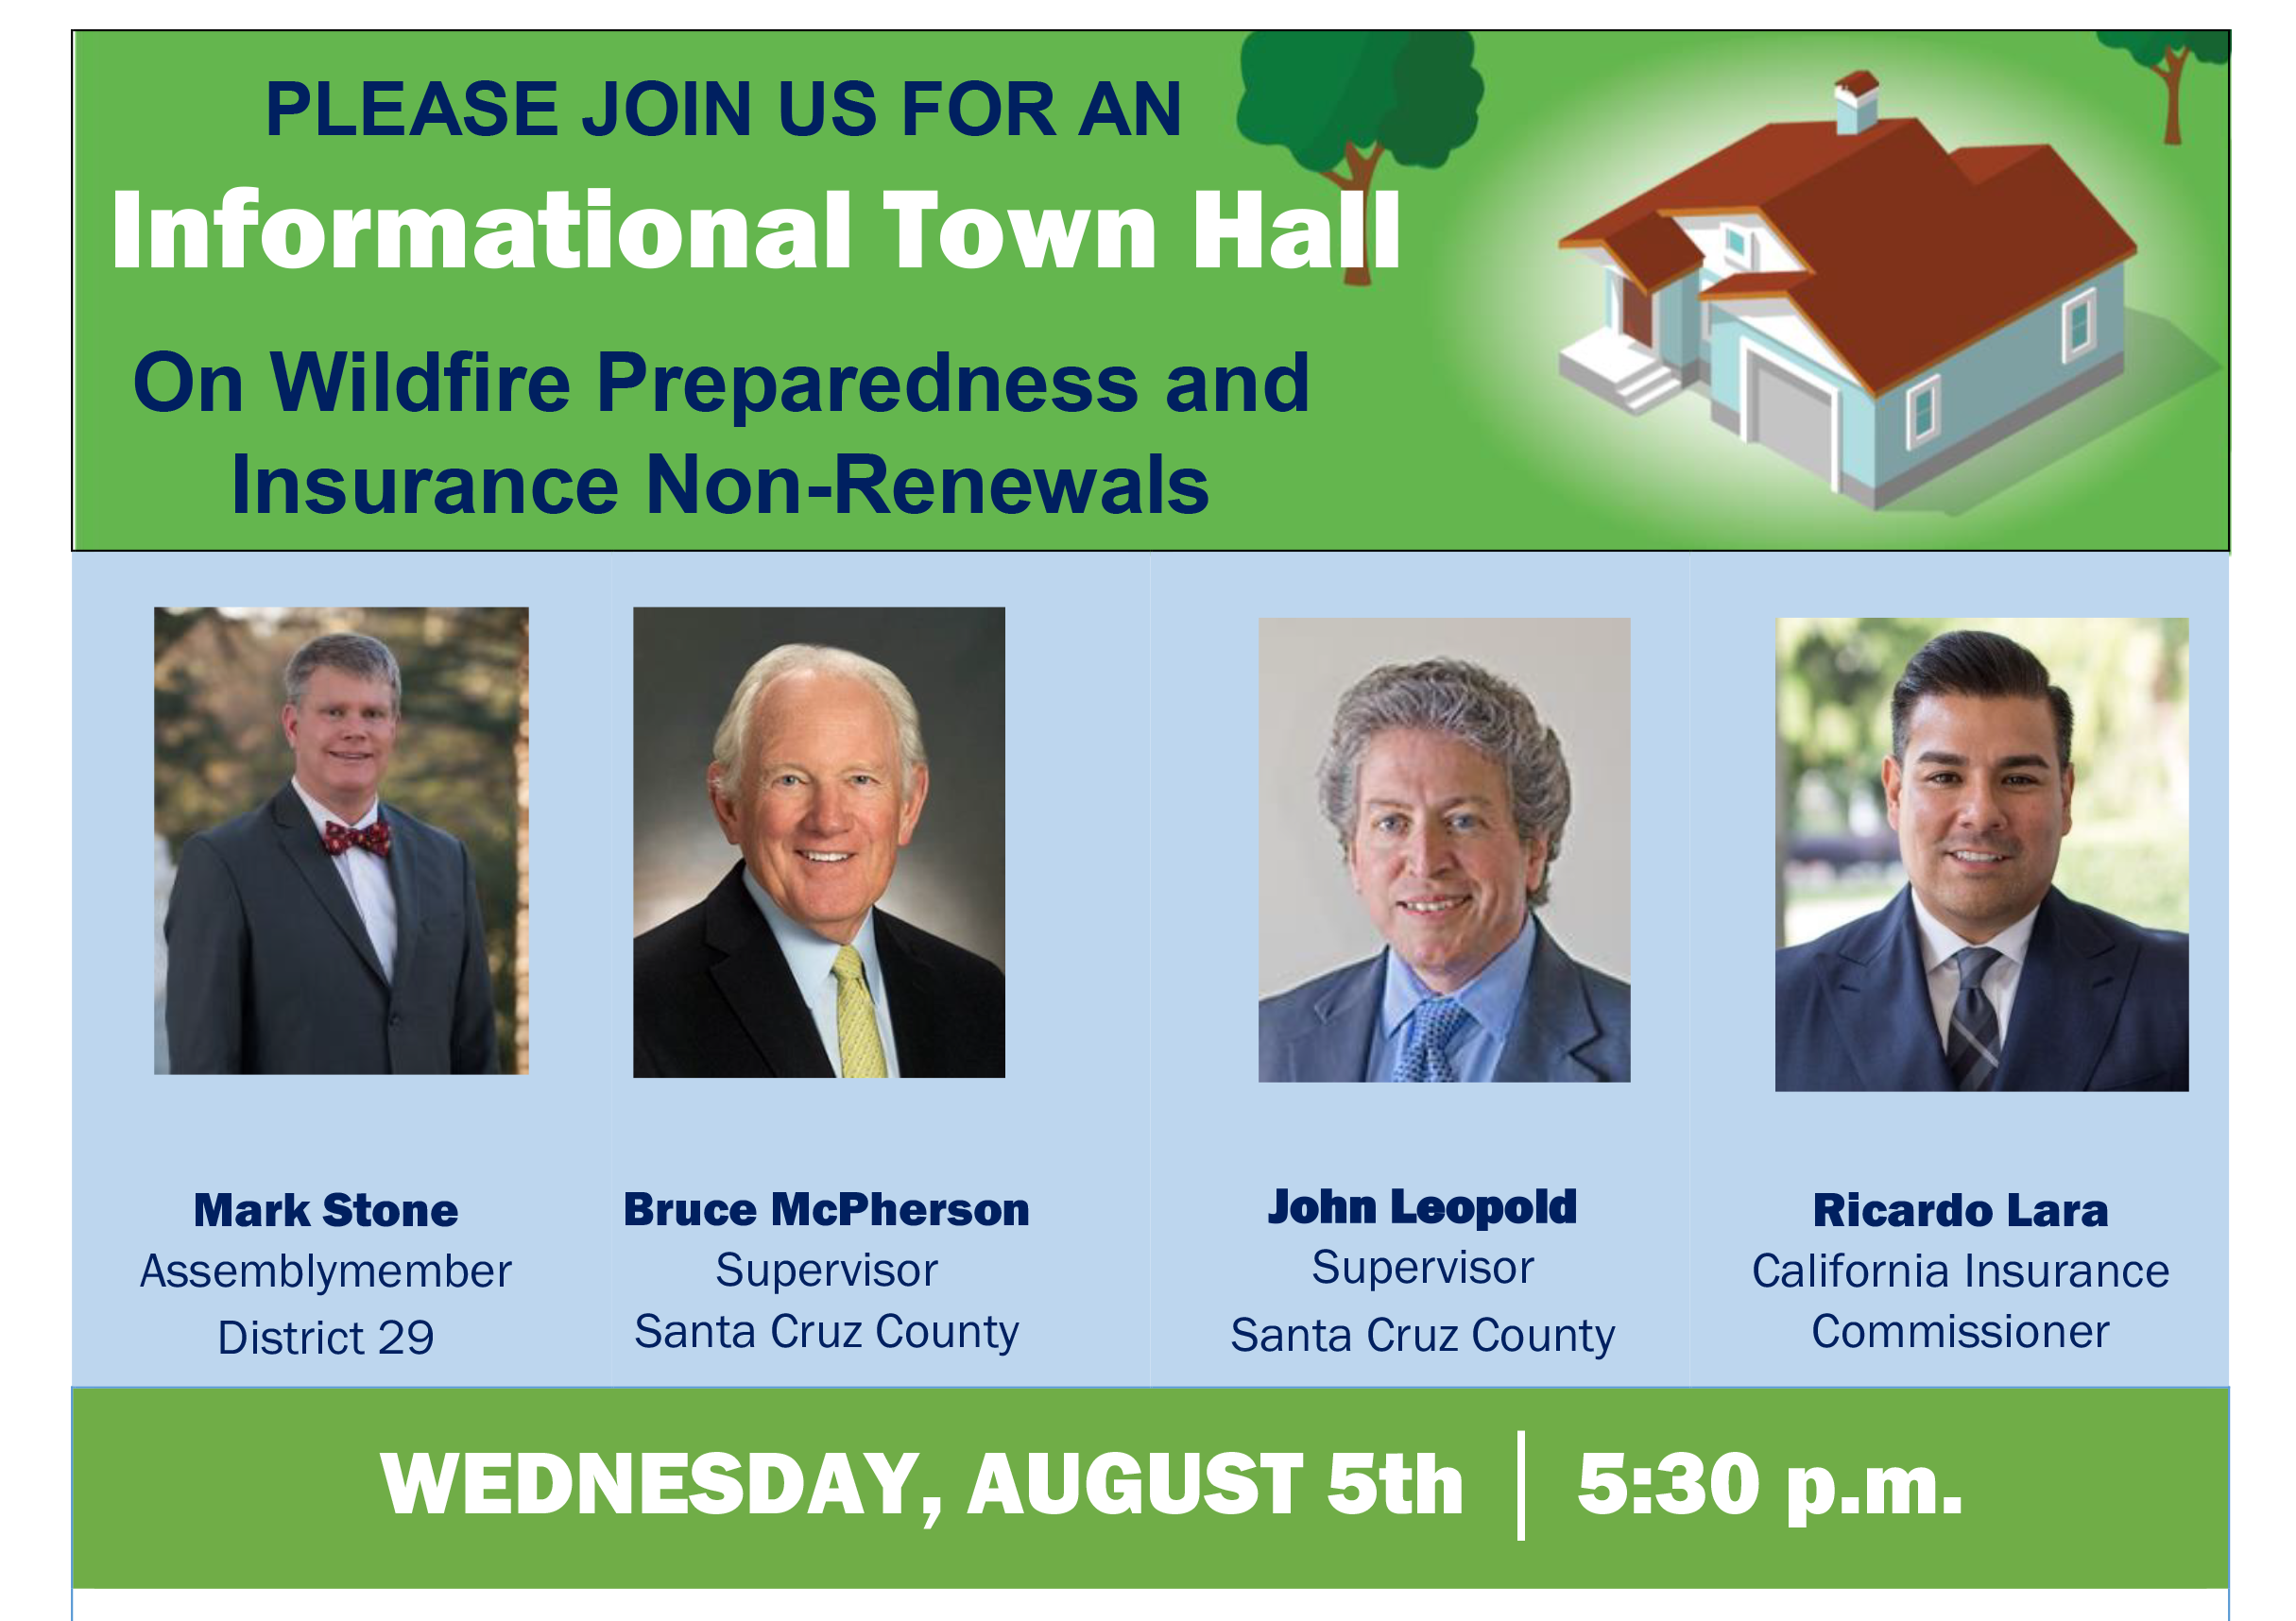 Please join us for an information townhall On Wildfire Preparedness and Insurance Non-Renewals